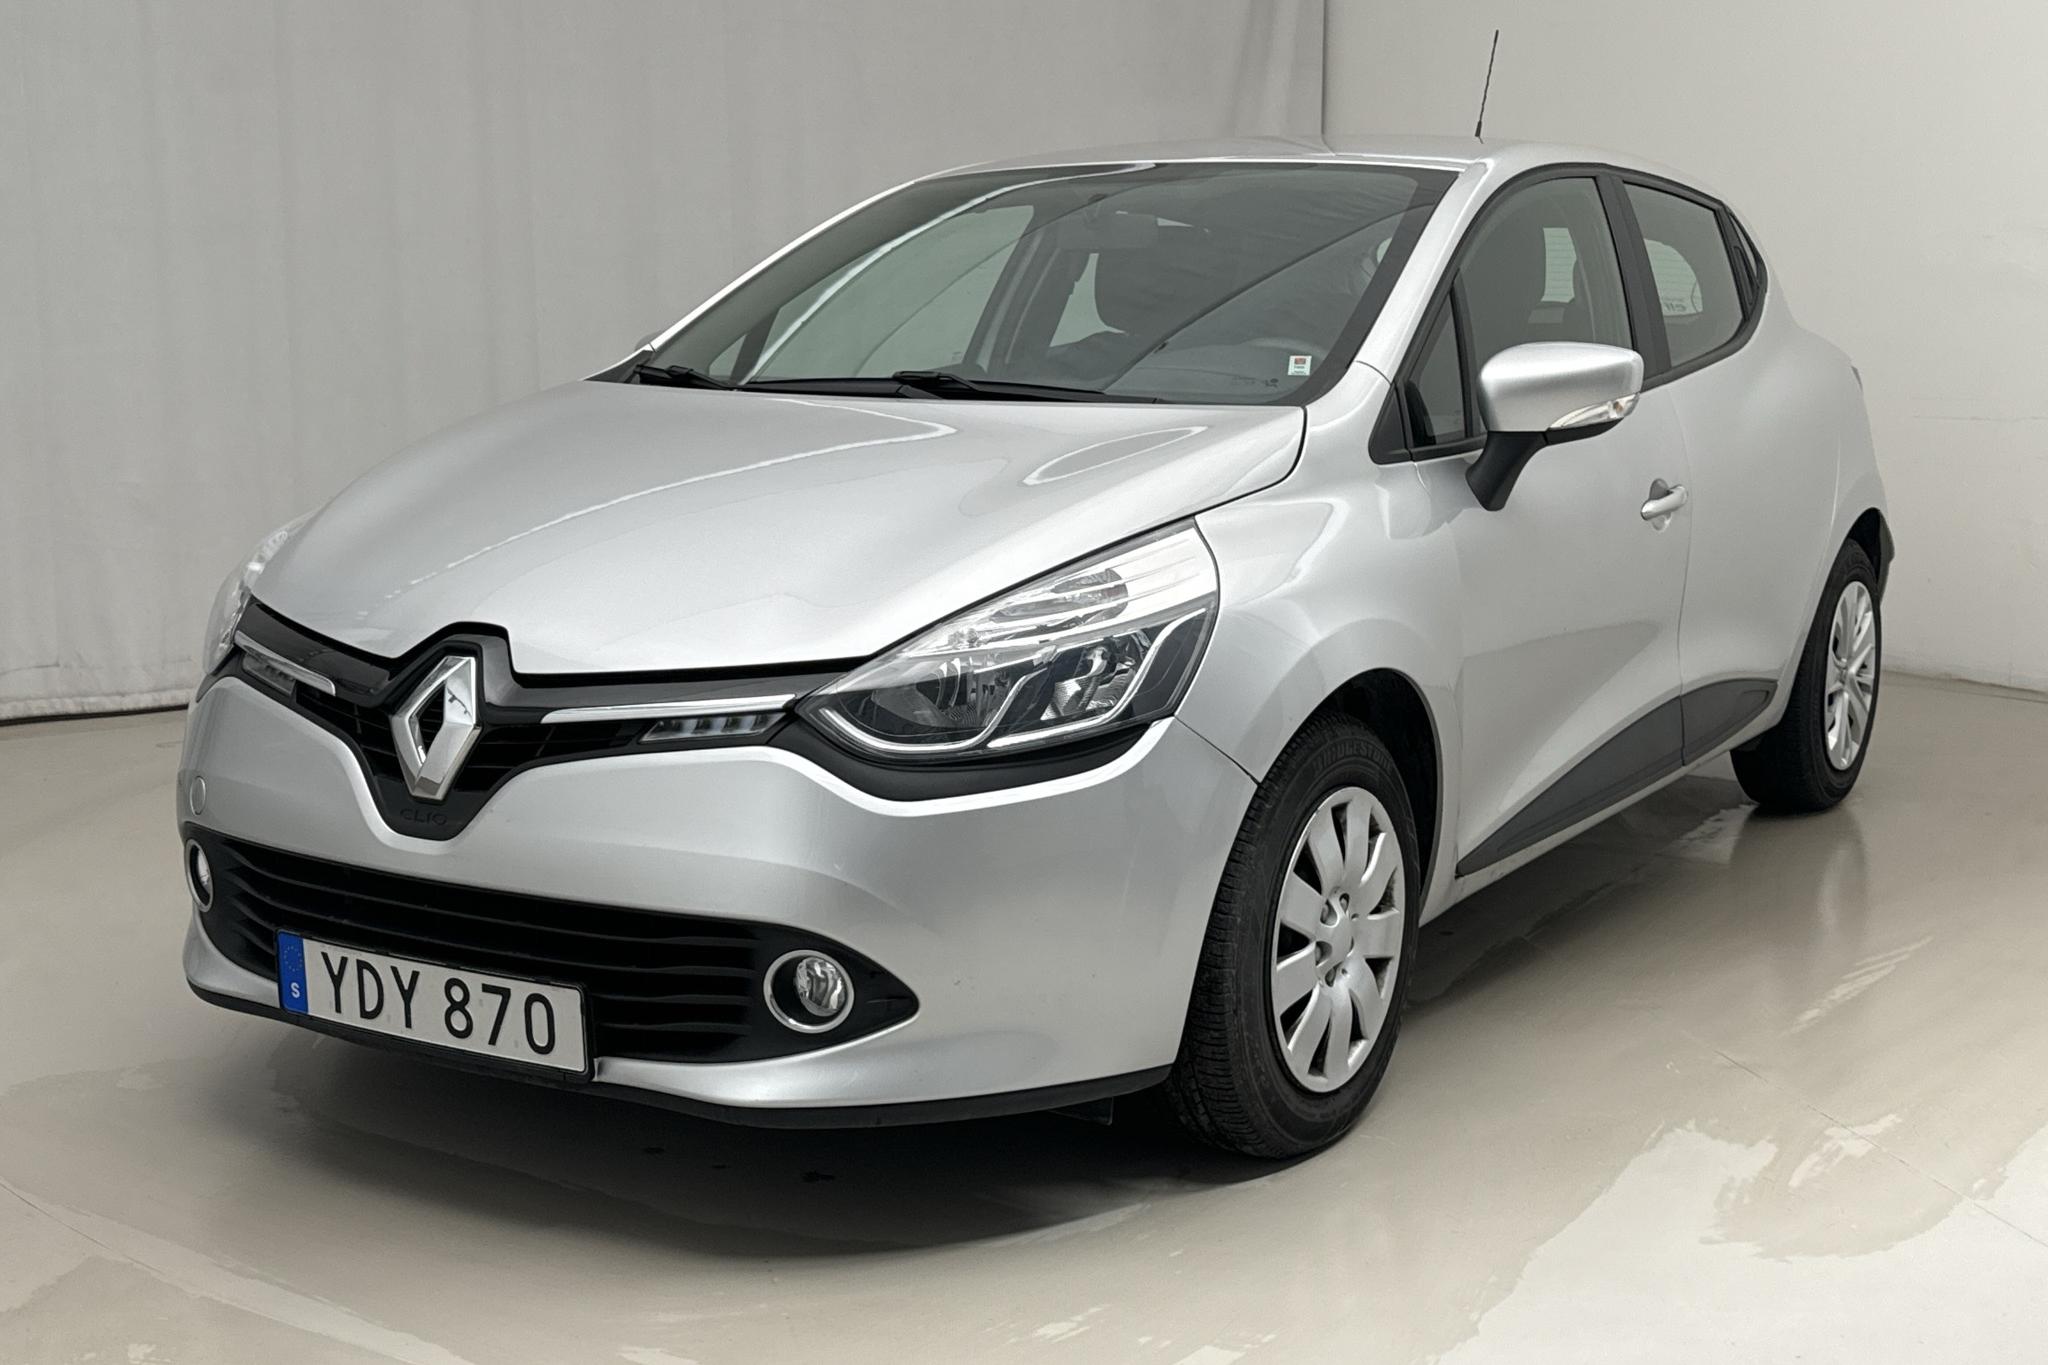 Renault Clio IV 0.9 TCe 90 5dr (90hk) - 71 210 km - Manual - silver - 2016